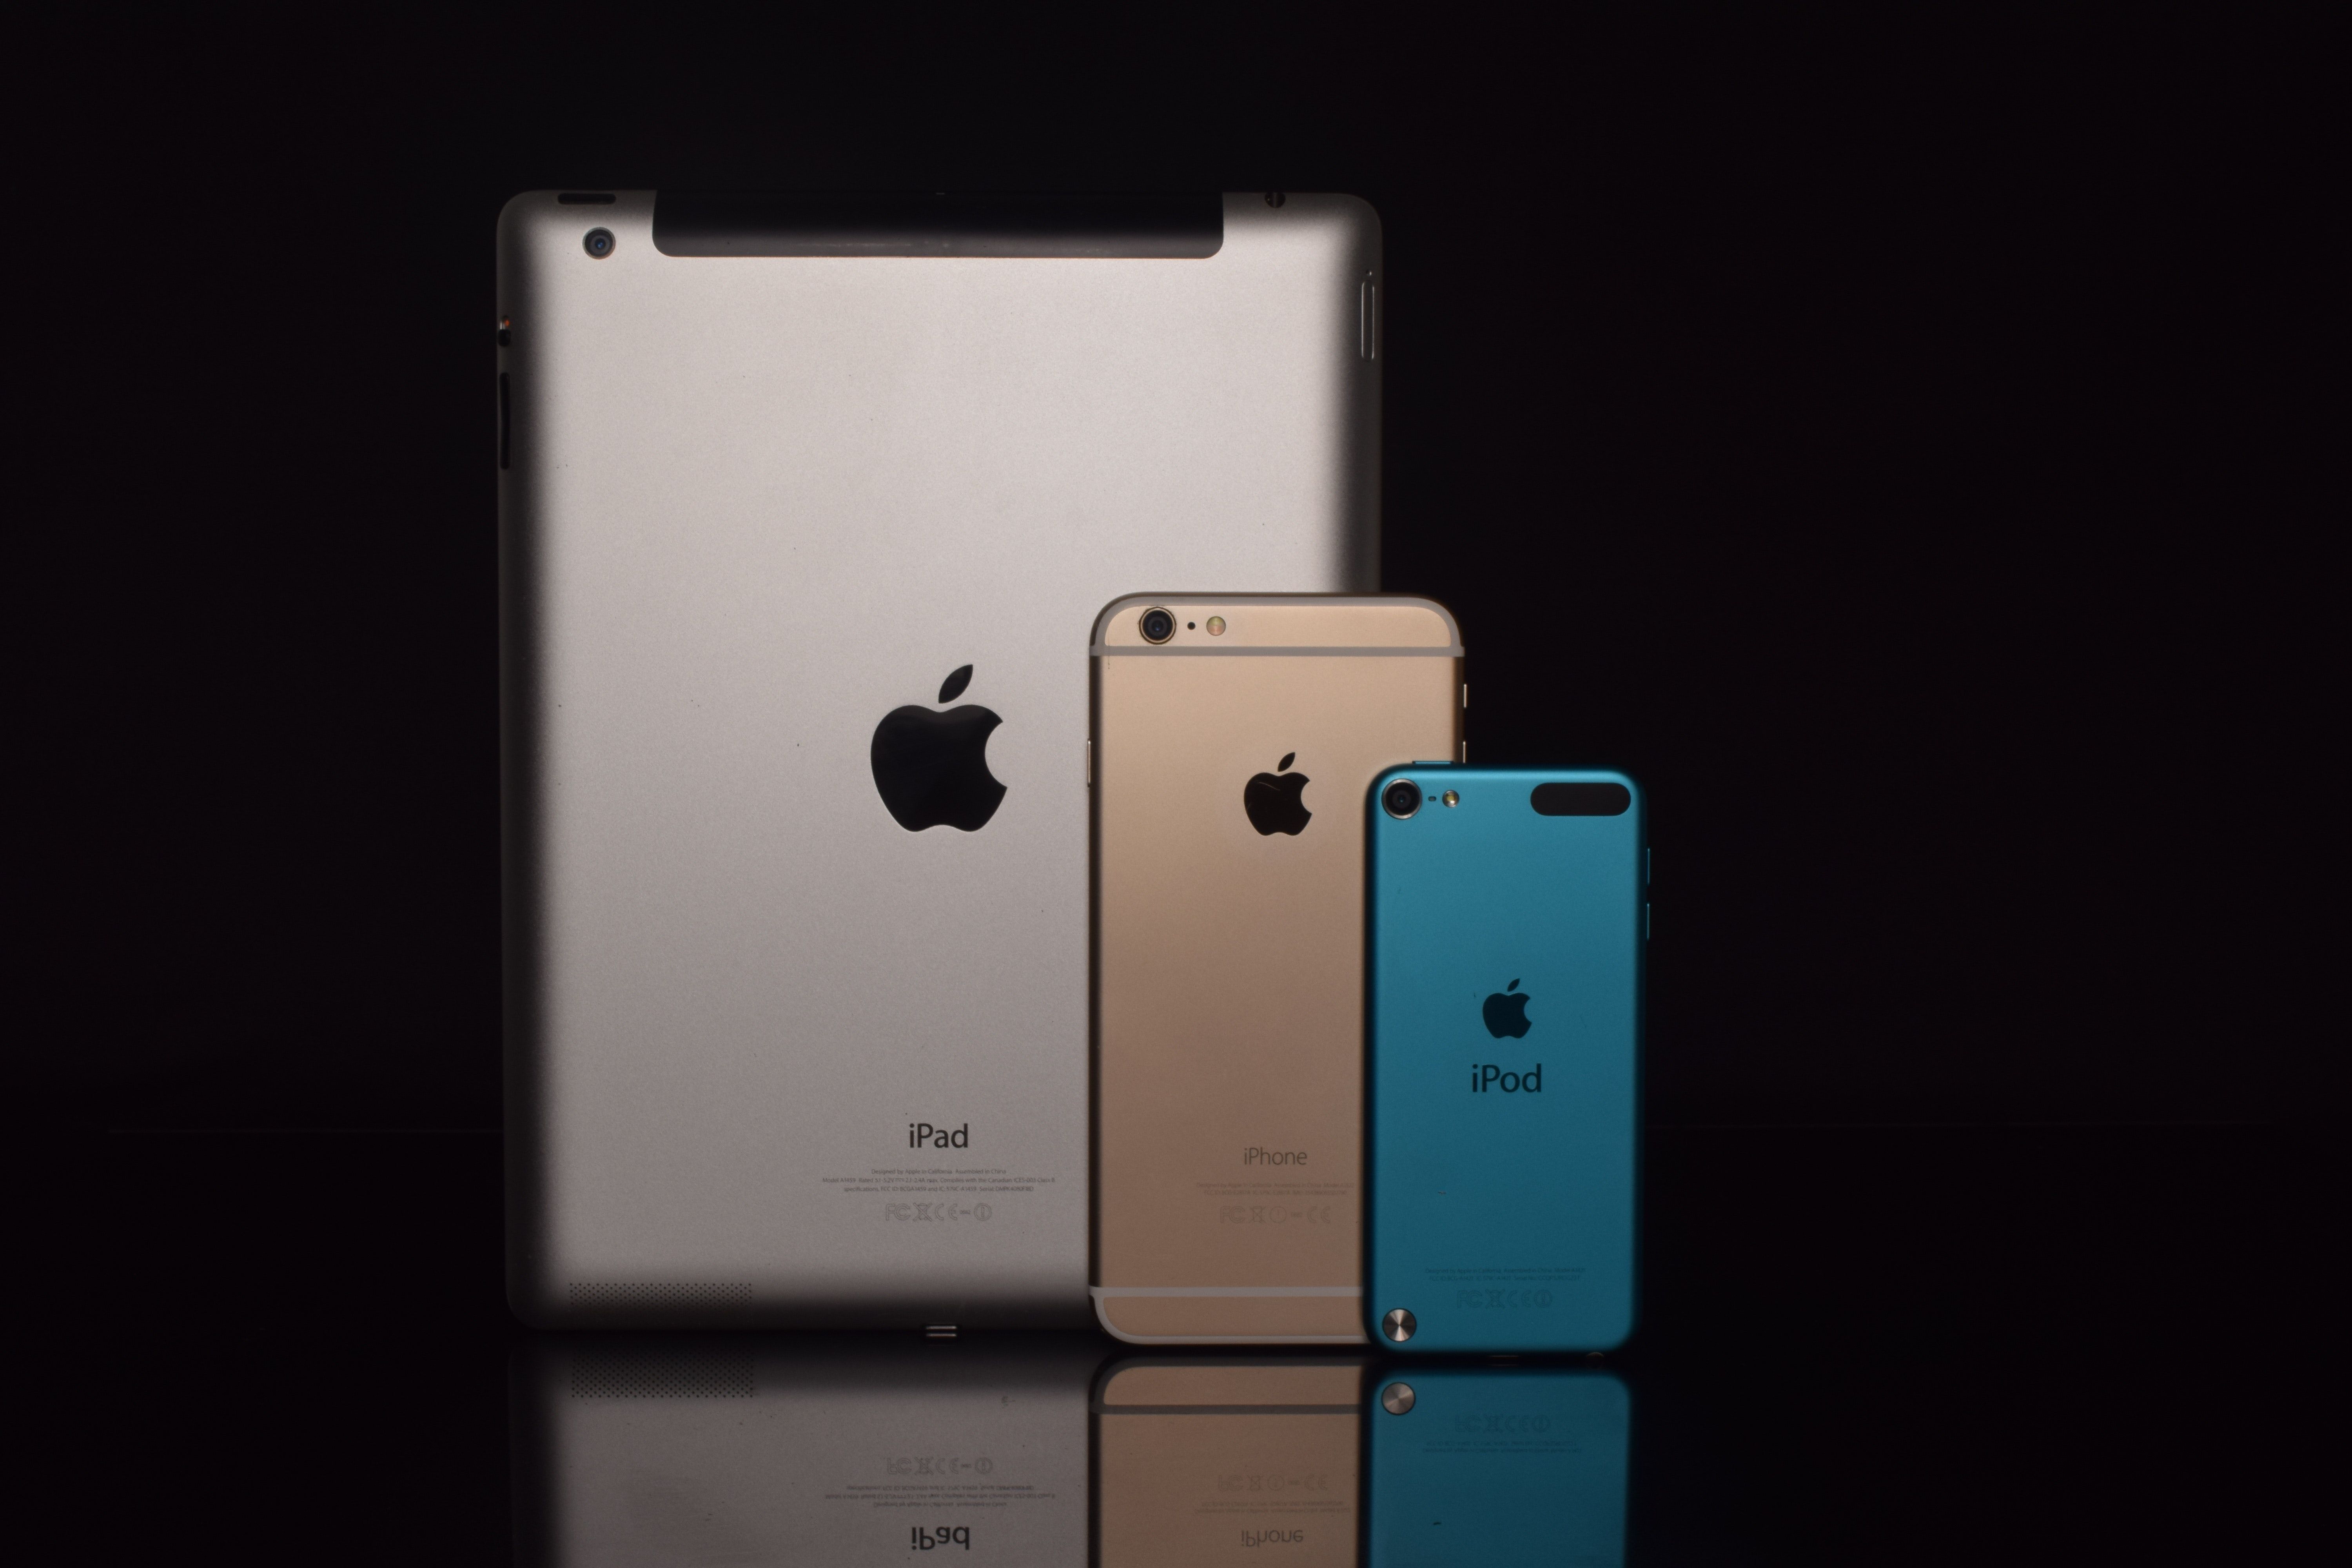 Different designs of the iPad, iPhone and iPad showing their varying sizes